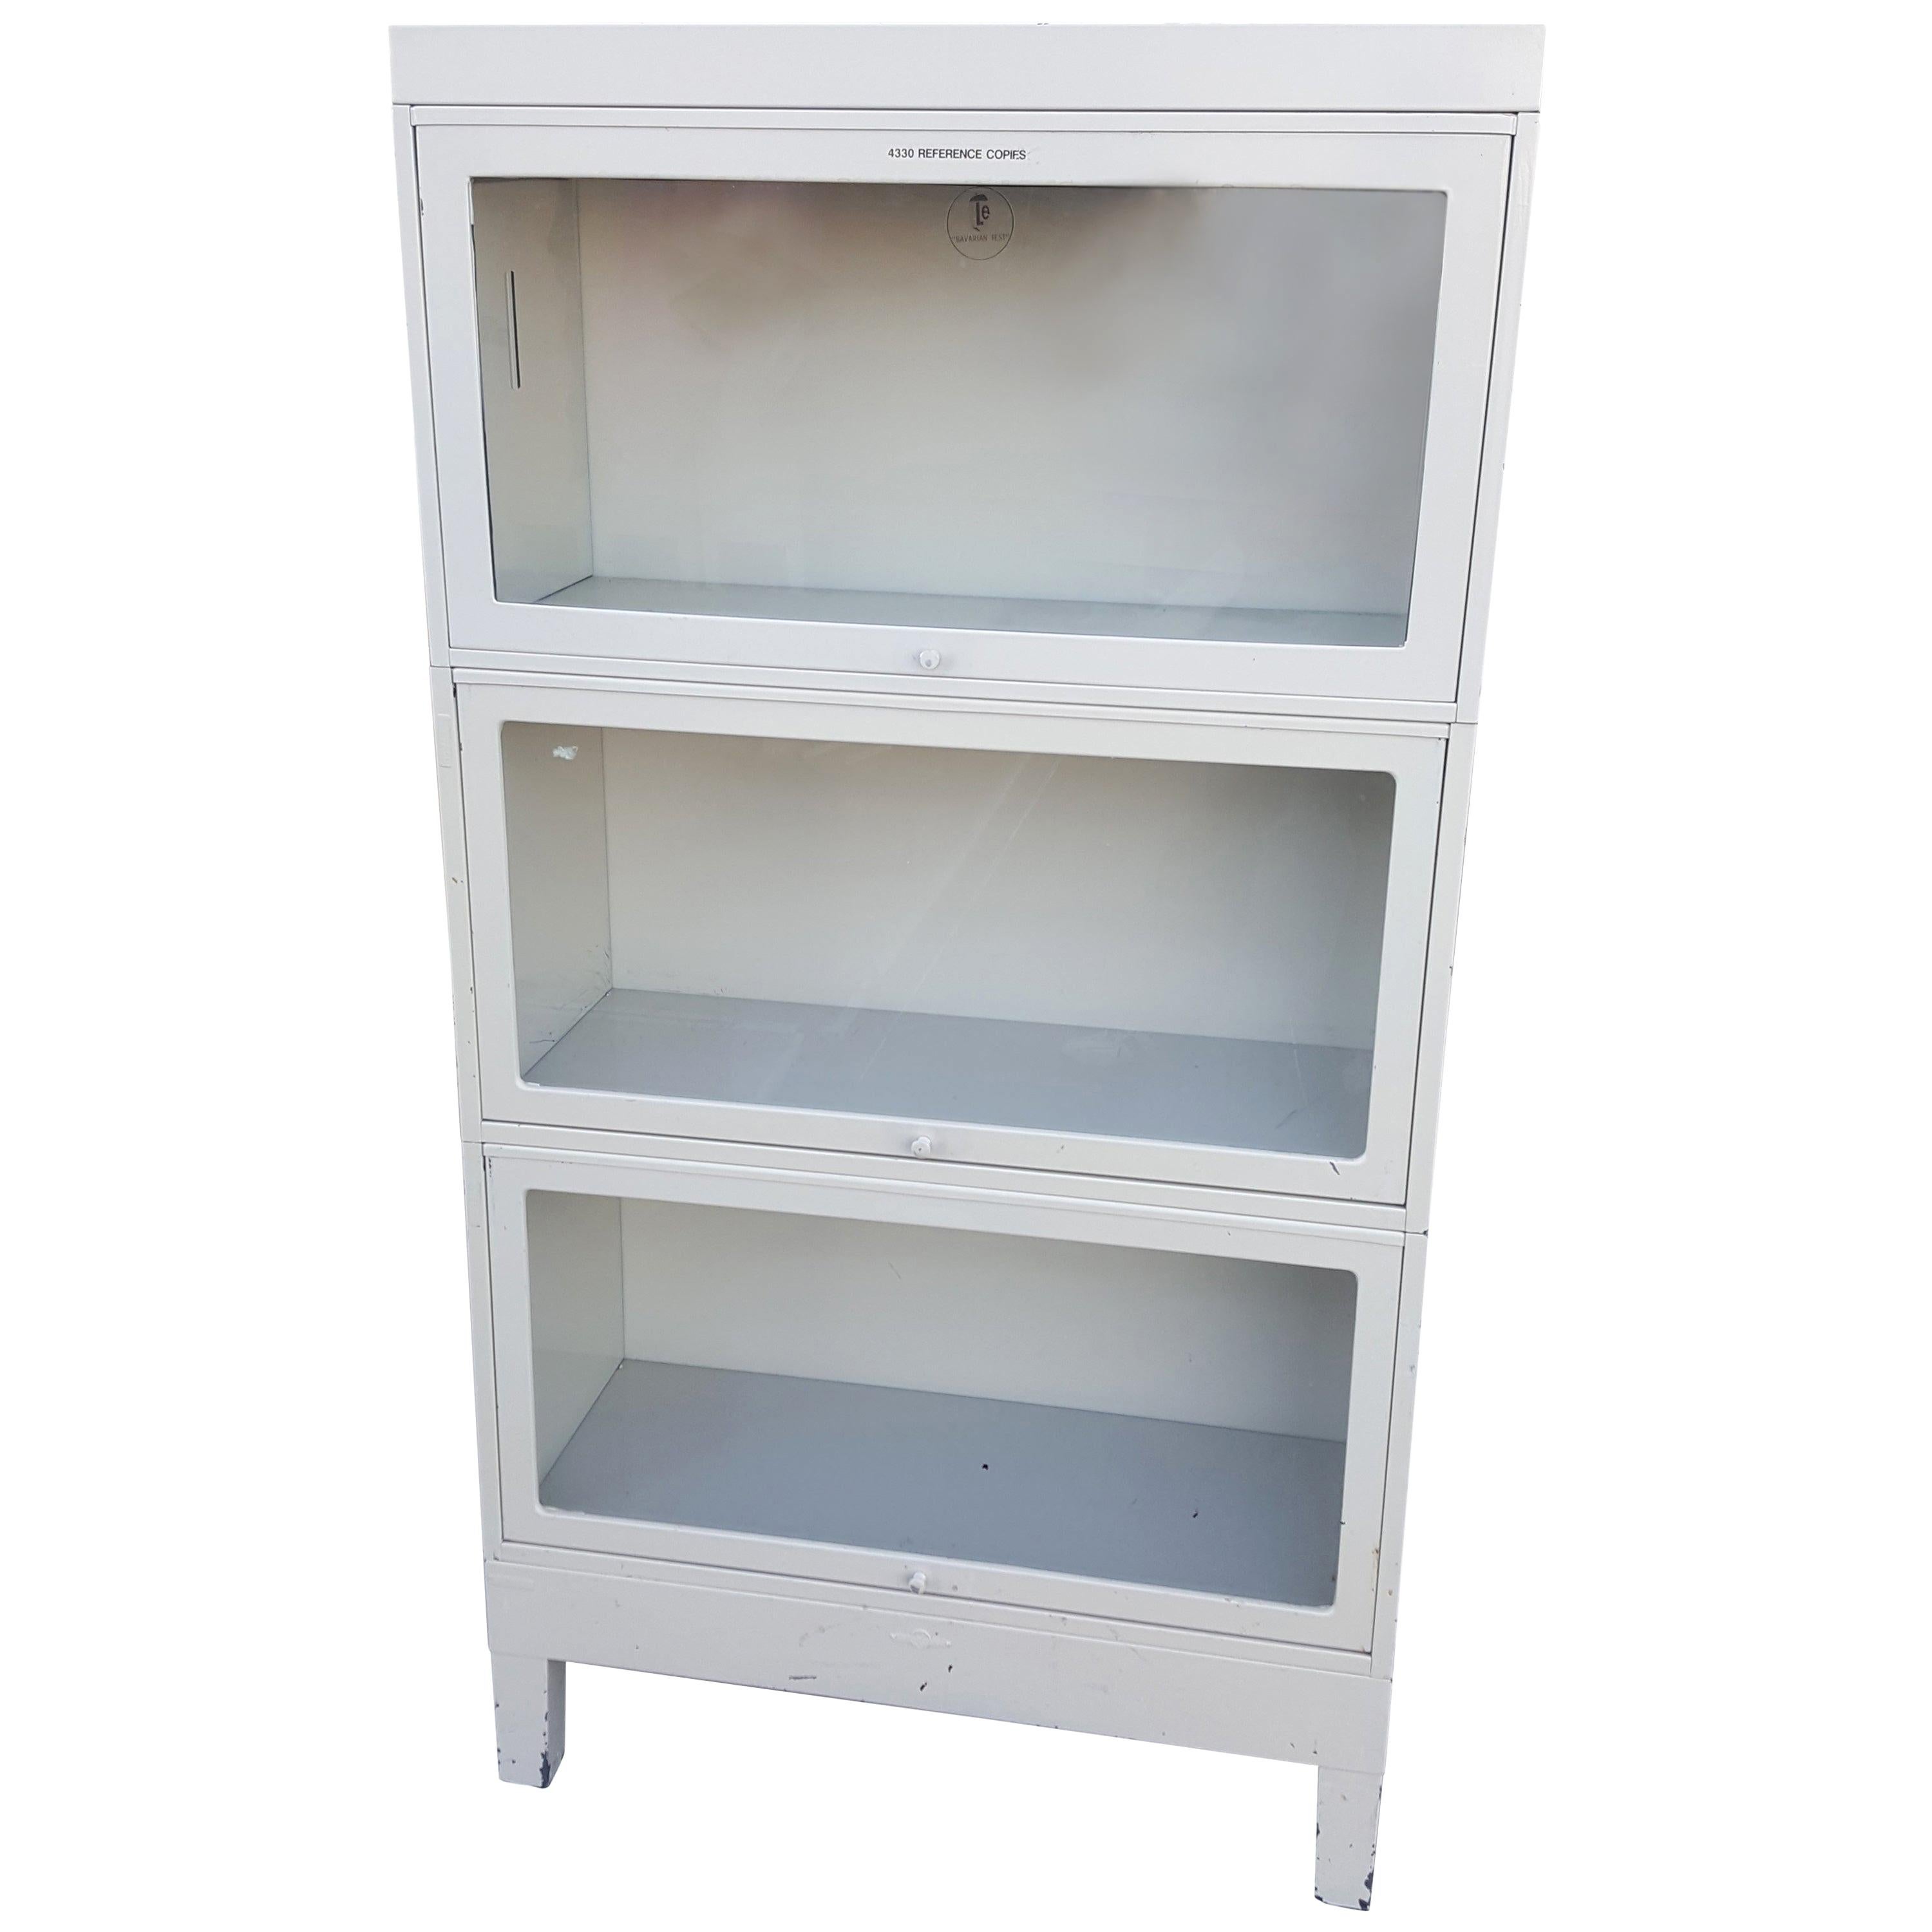 Storage Barrister Cabinet or Bookcase Three-Sections of Steel with Glass Fronts